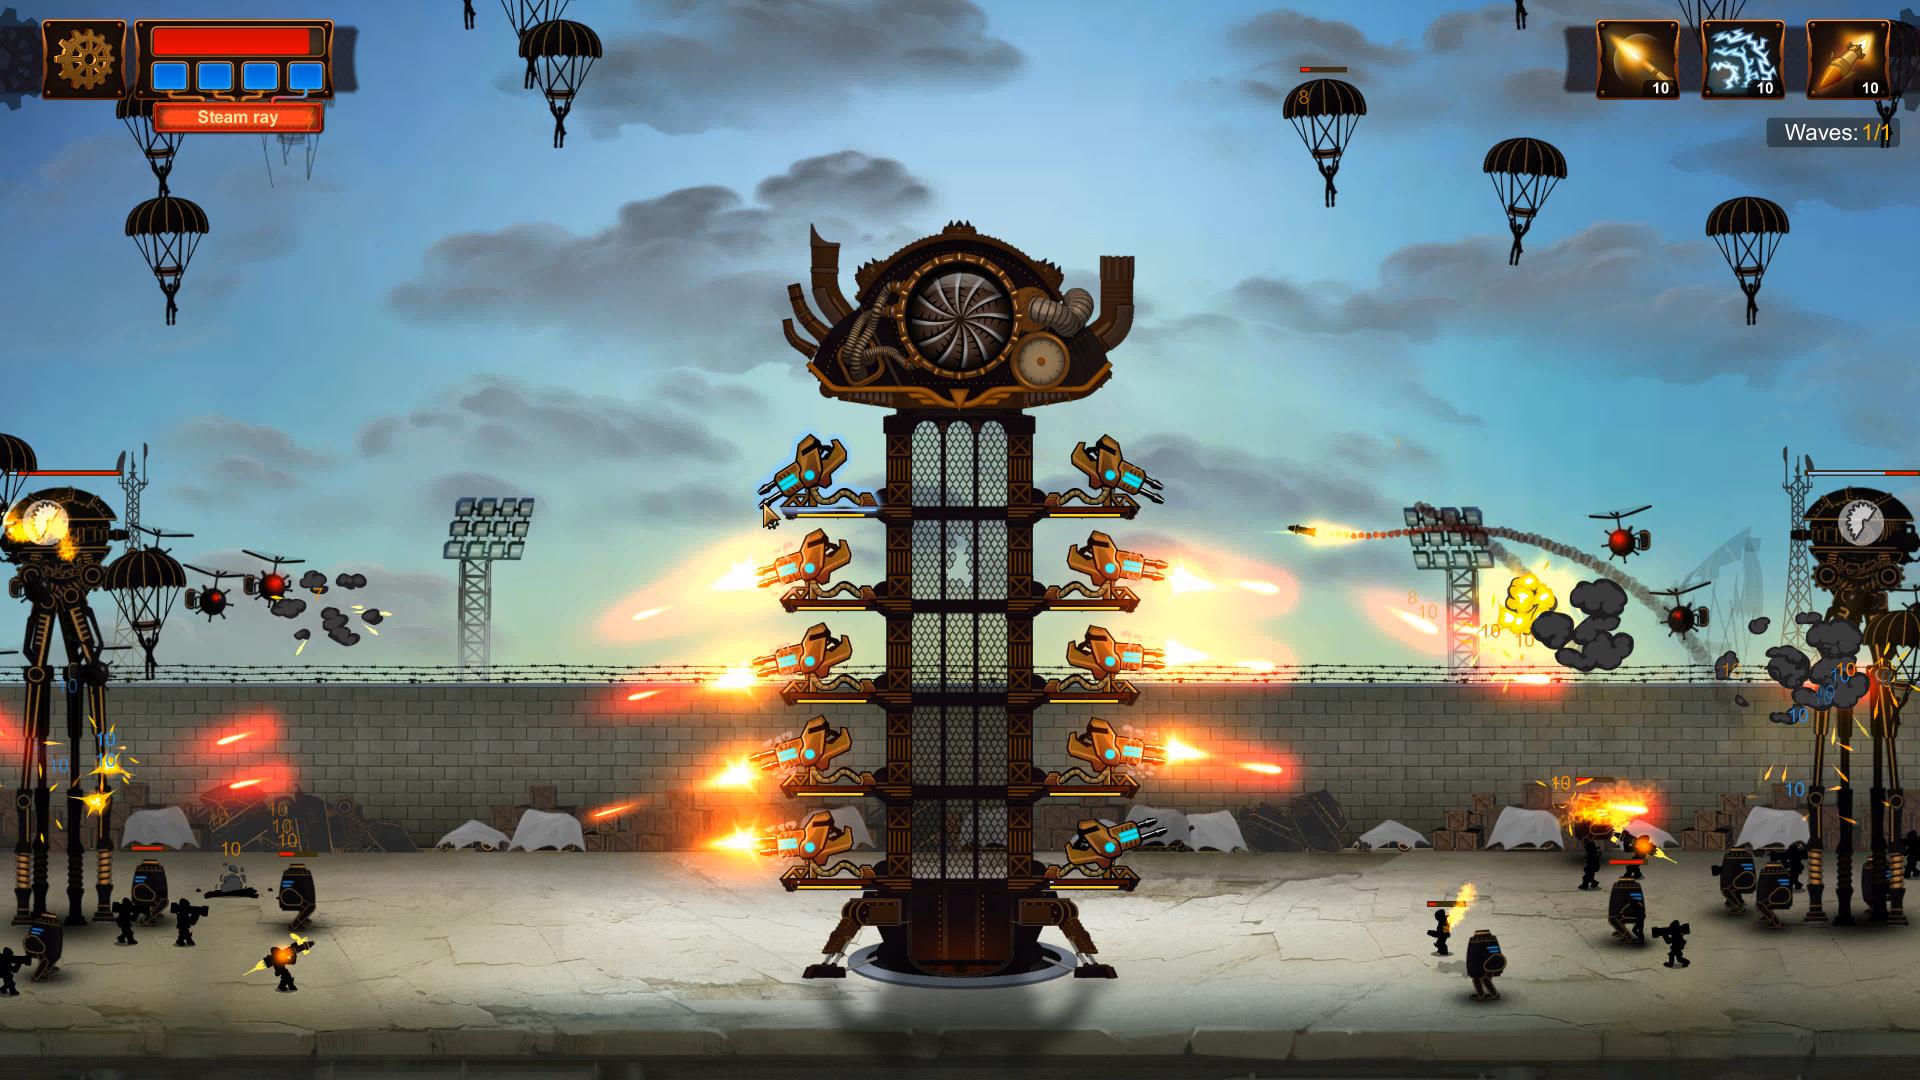 Tower Defense Steampunk download the last version for android